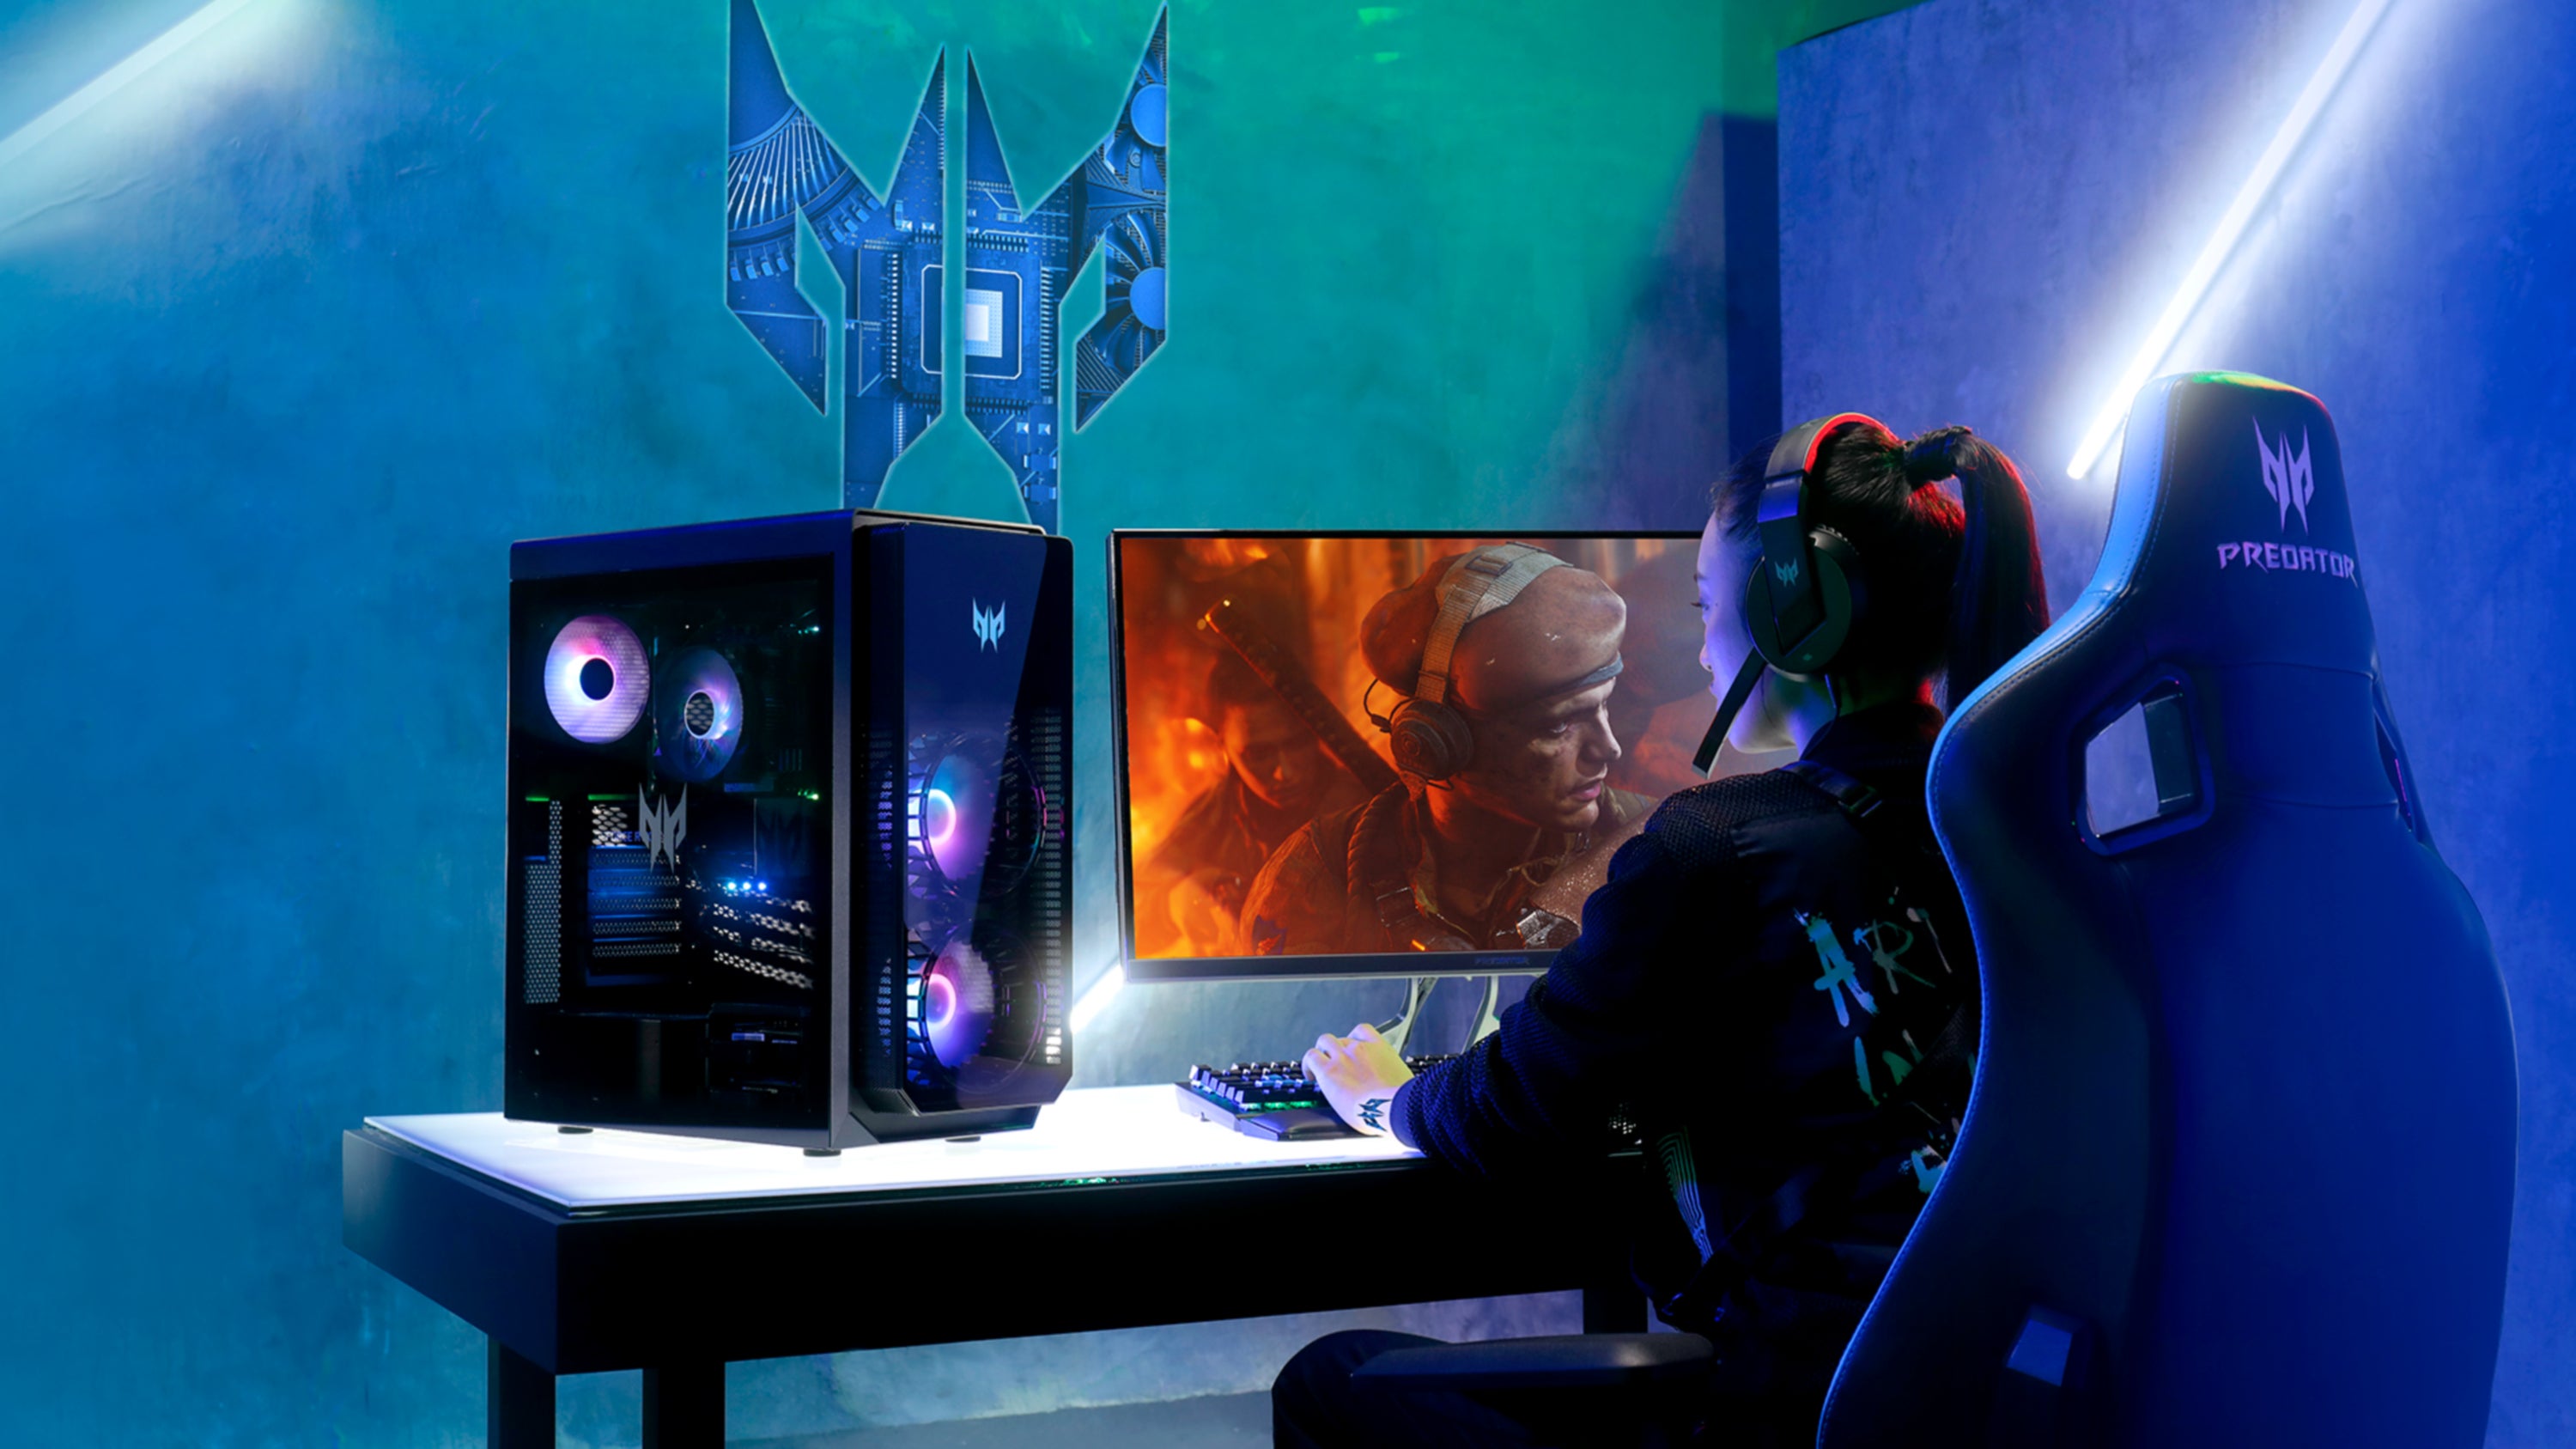 The Acer Predator Orion 5000 is sitting on a desk next to a woman playing games on it.